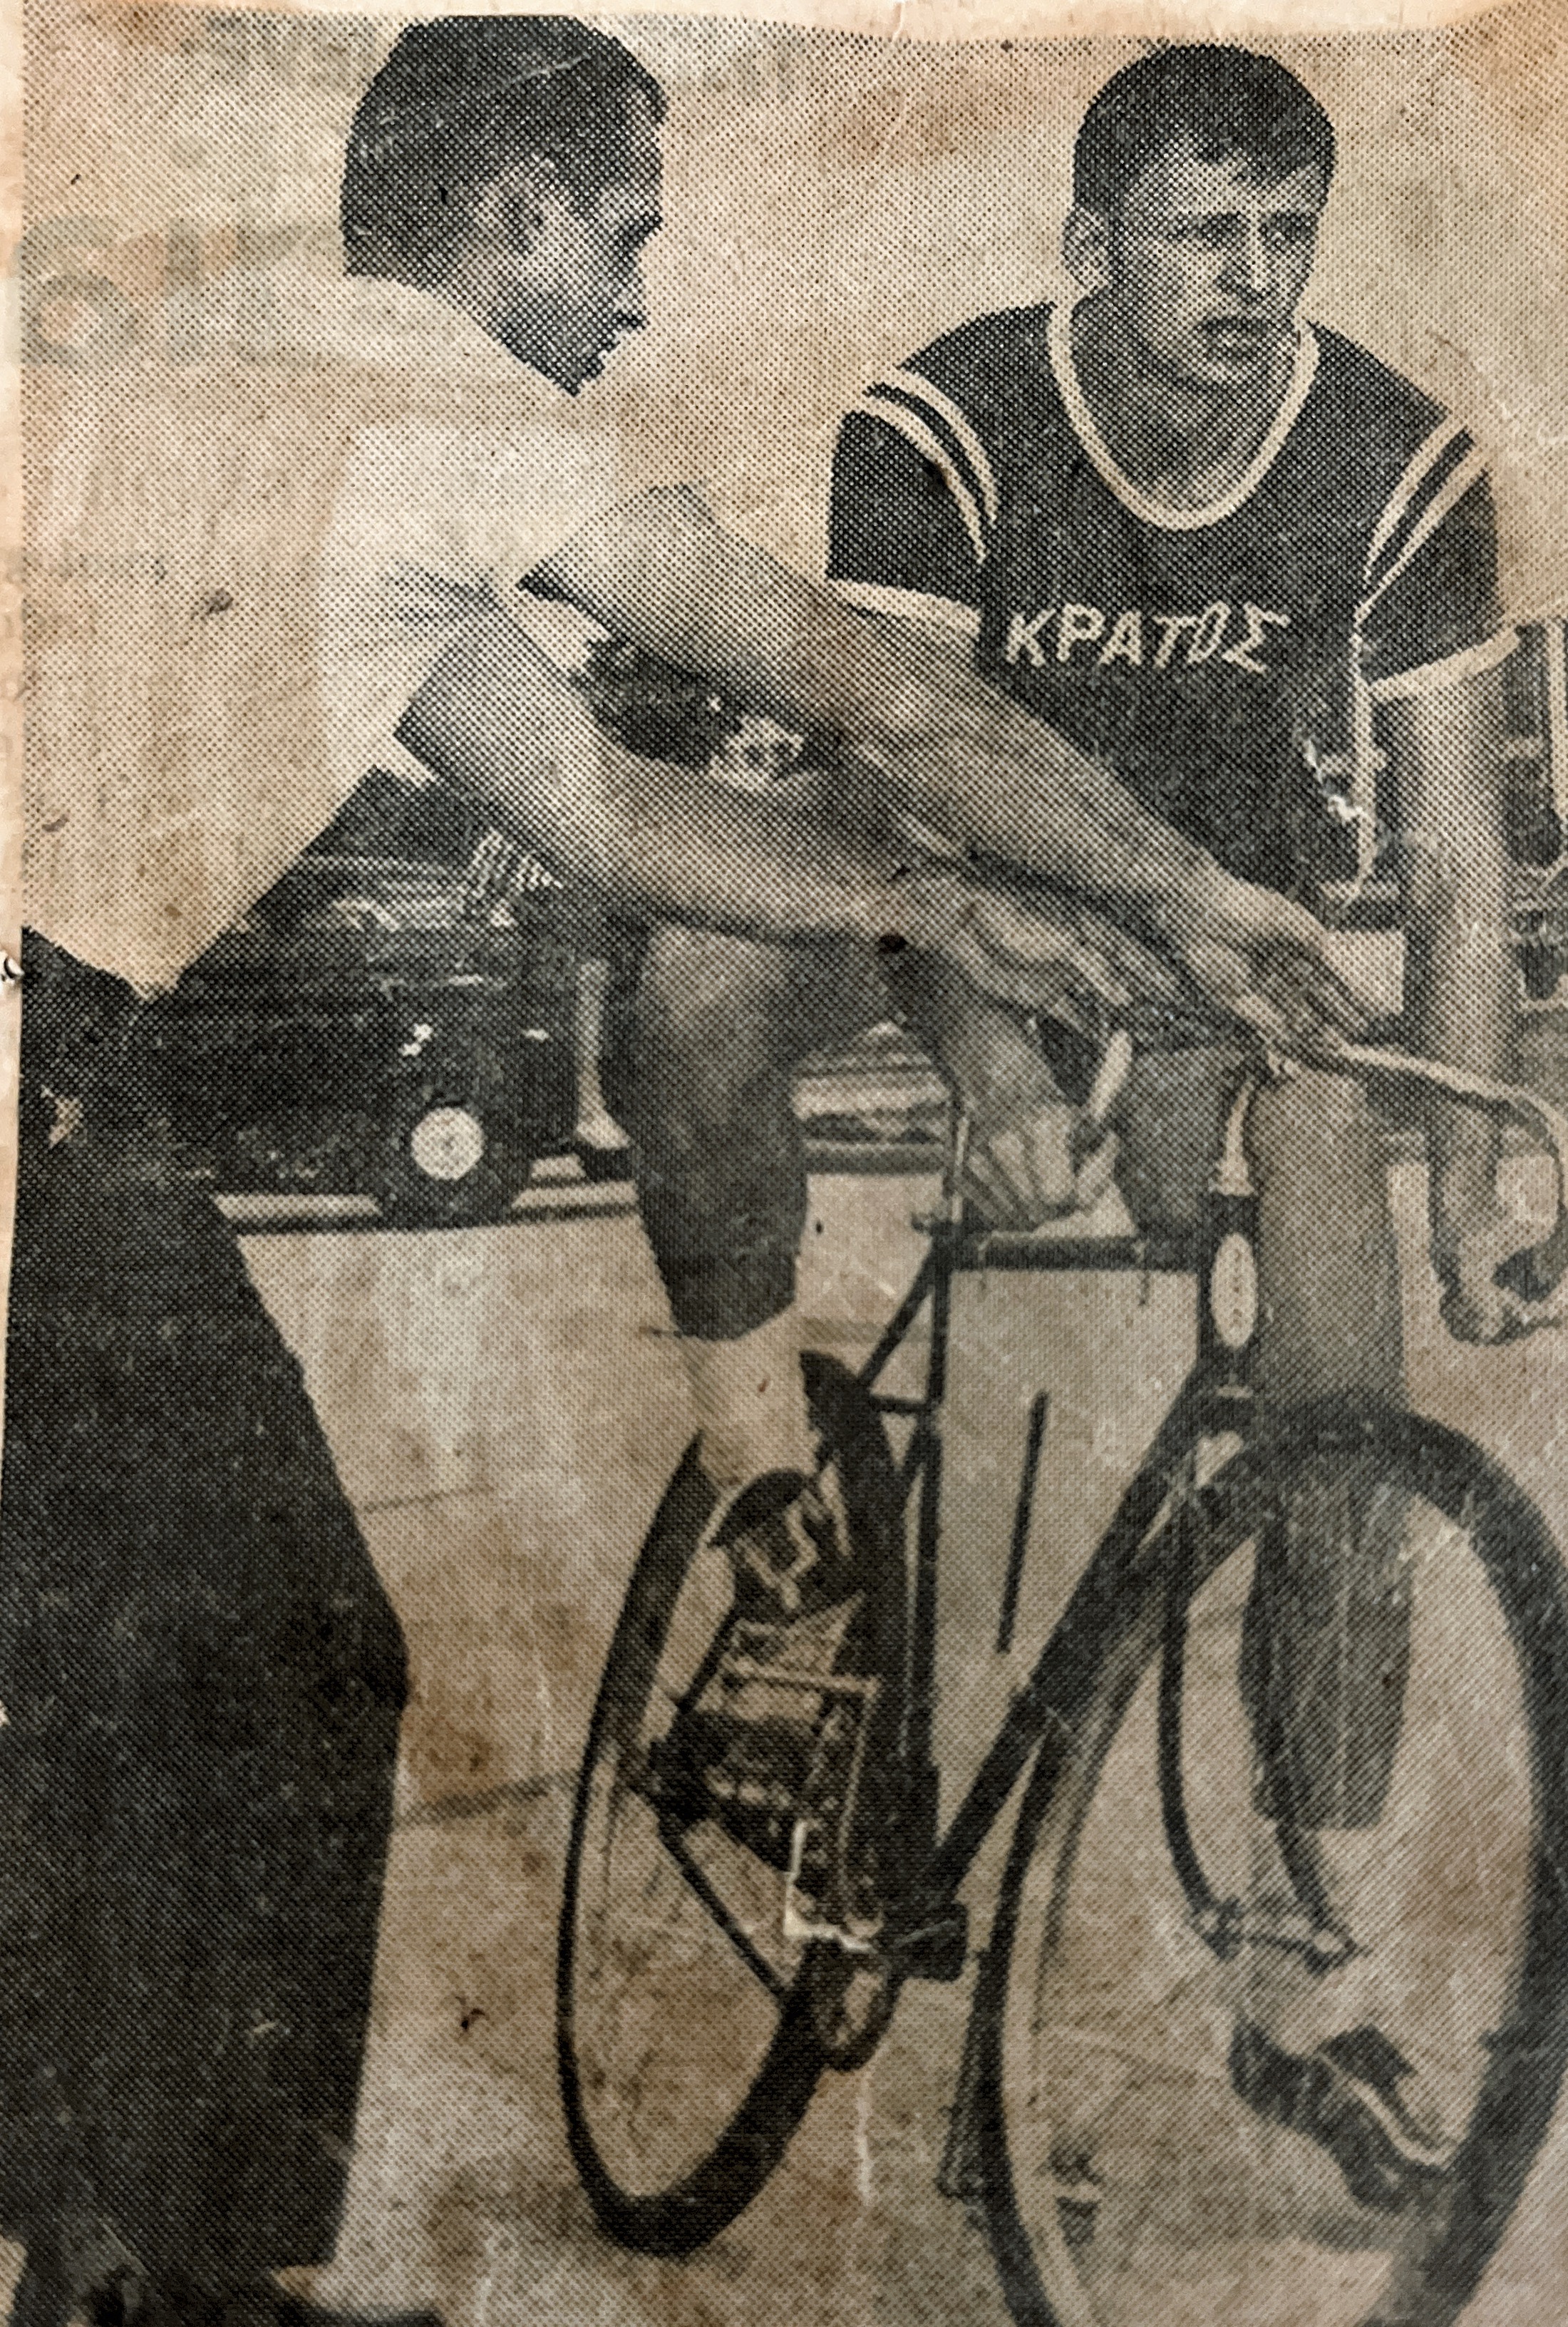 Bicycle relay race USF Spring 1964.